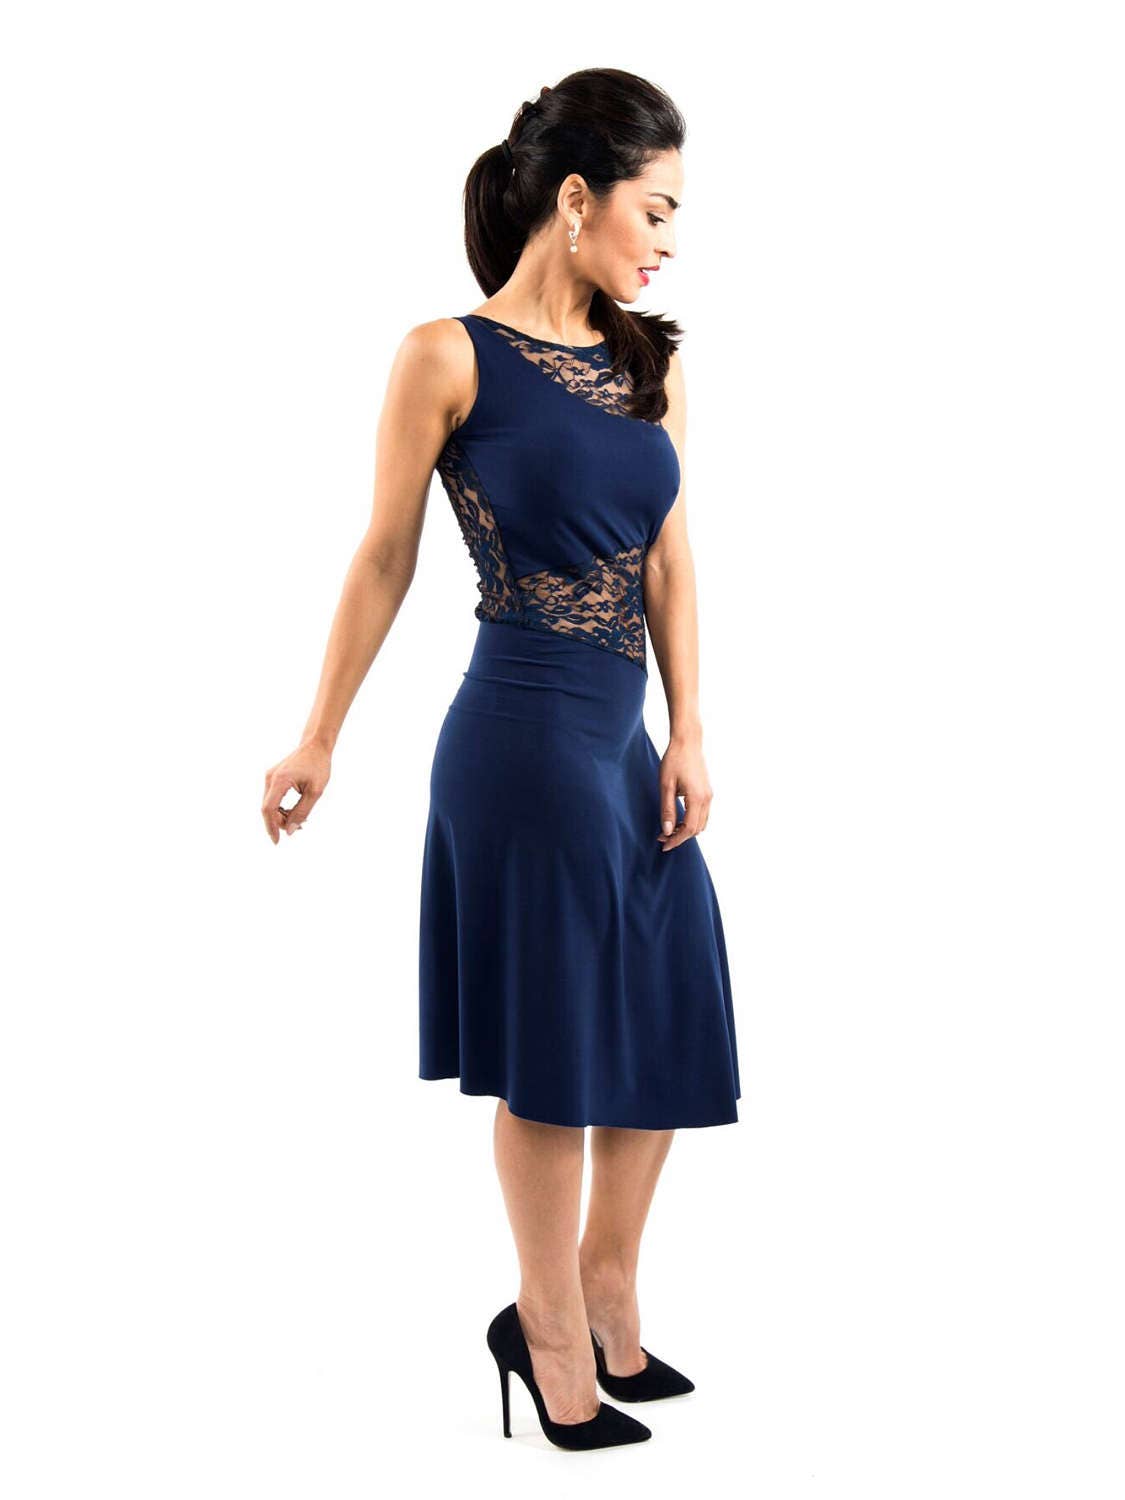 Navy Blue Argentine Tango Dress With Lace Inserts - Etsy